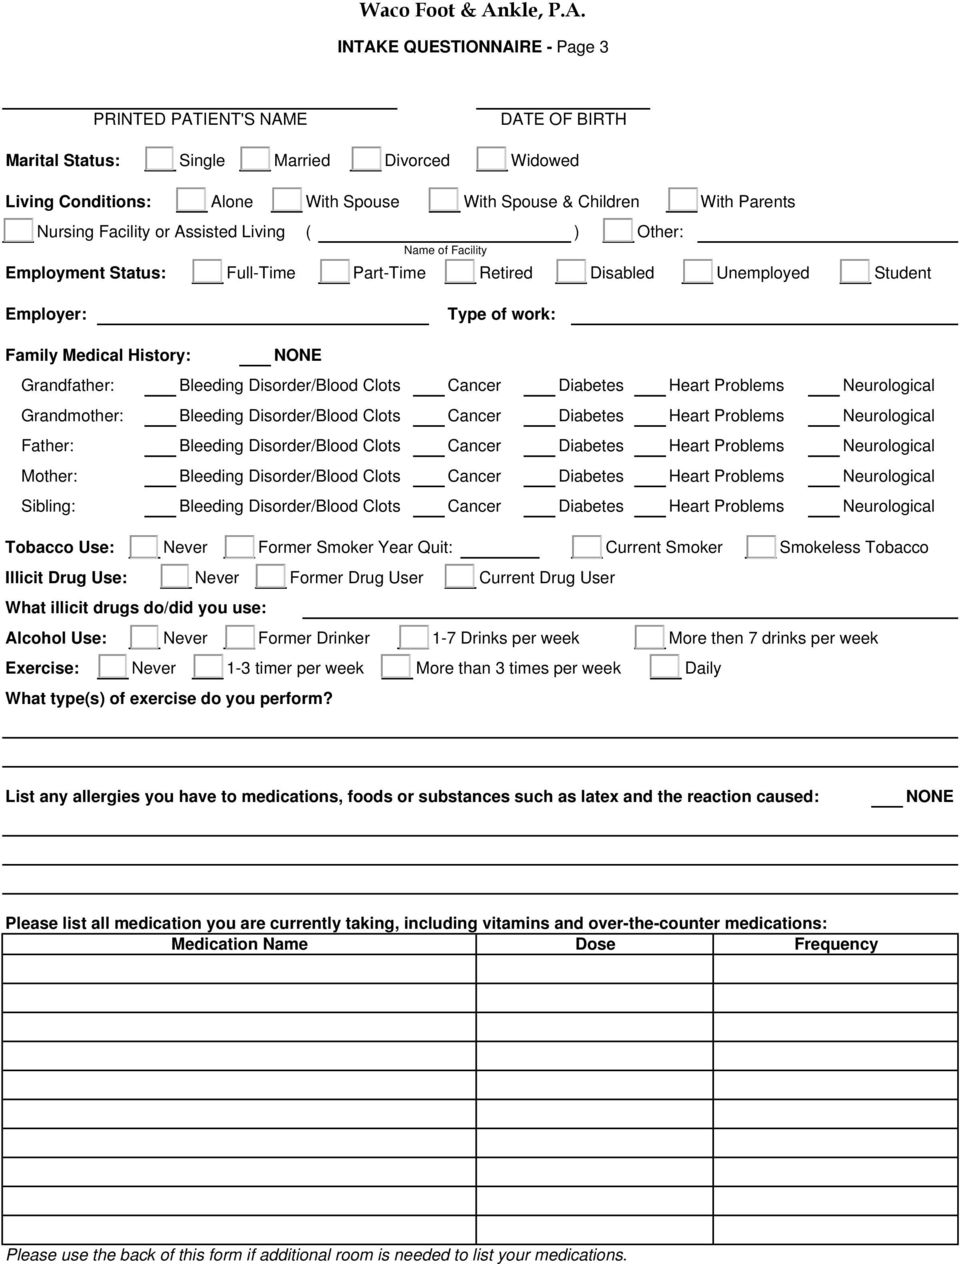 INTAKE QUESTIONNAIRE - Page 3 Marital Status: Single Married Divorced Widowed Living Conditions: Alone With Spouse With Spouse & Children With Parents Nursing Facility or Assisted Living ( ) Other: